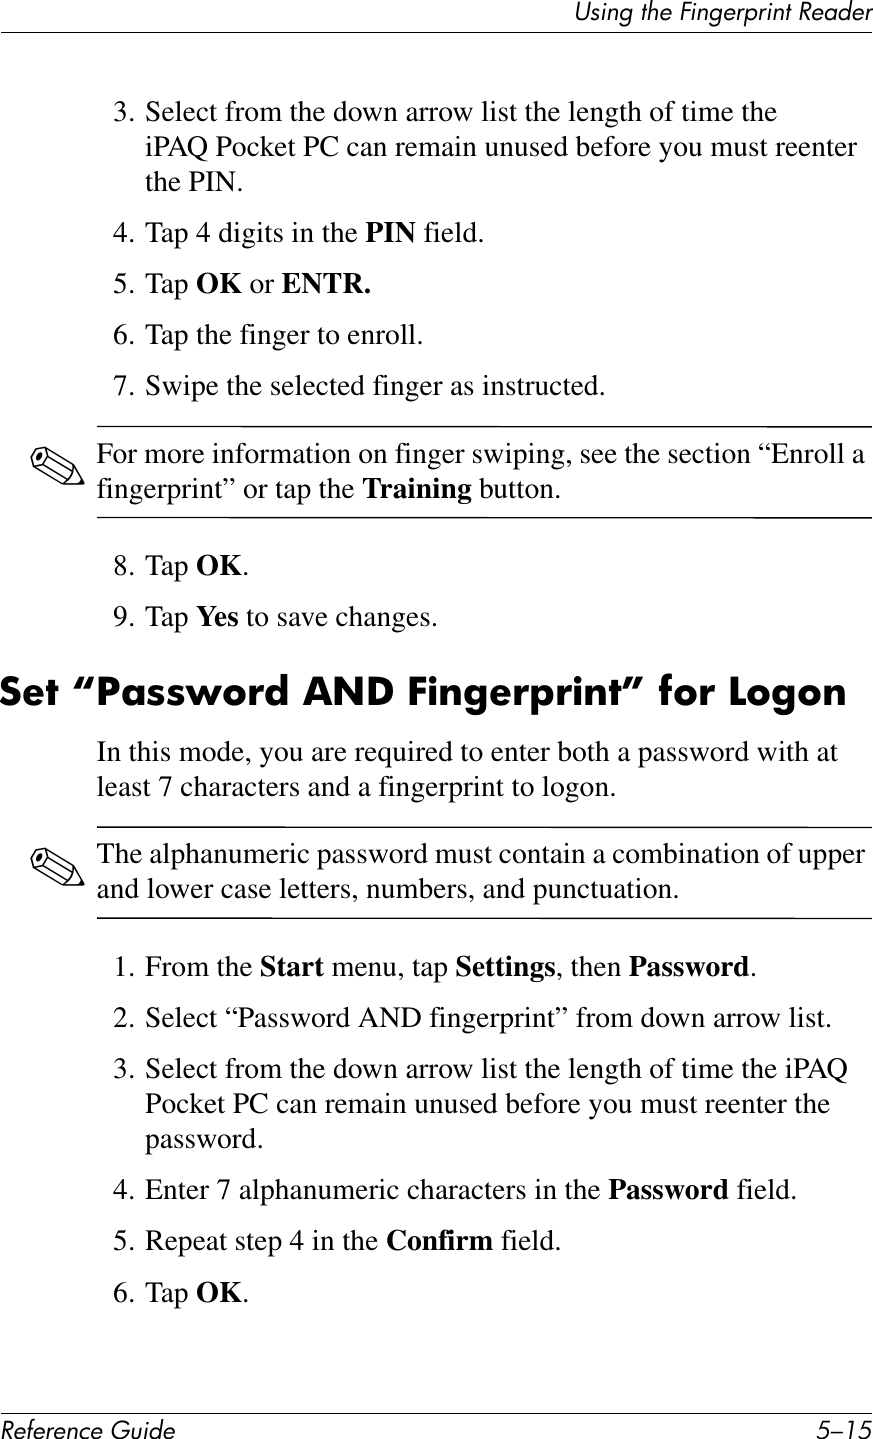 UL*%2&apos;1Q&quot;&apos;O*%2&quot;$@$*%1&apos;!&quot;4+&quot;$!&quot;#&quot;$&quot;%&amp;&quot;&apos;()*+&quot; D/.D3. Select from the down arrow list the length of time the iPAQ Pocket PC can remain unused before you must reenter the PIN.4. Tap 4 digits in the PIN field.5. Tap OK or ENTR.6. Tap the finger to enroll.7. Swipe the selected finger as instructed. ✎For more information on finger swiping, see the section “Enroll a fingerprint” or tap the Training button.8. Tap OK.9. Tap Yes to save changes.:&quot;7&amp;gS;88L6!*&amp;,.U&amp;E)$&apos;&quot;!F!)$7h&amp;#6!&amp;A6&apos;6$In this mode, you are required to enter both a password with at least 7 characters and a fingerprint to logon.✎The alphanumeric password must contain a combination of upper and lower case letters, numbers, and punctuation.1. From the Start menu, tap Settings, then Password.2. Select “Password AND fingerprint” from down arrow list.3. Select from the down arrow list the length of time the iPAQ Pocket PC can remain unused before you must reenter the password.4. Enter 7 alphanumeric characters in the Password field.5. Repeat step 4 in the Confirm field.6. Tap OK.